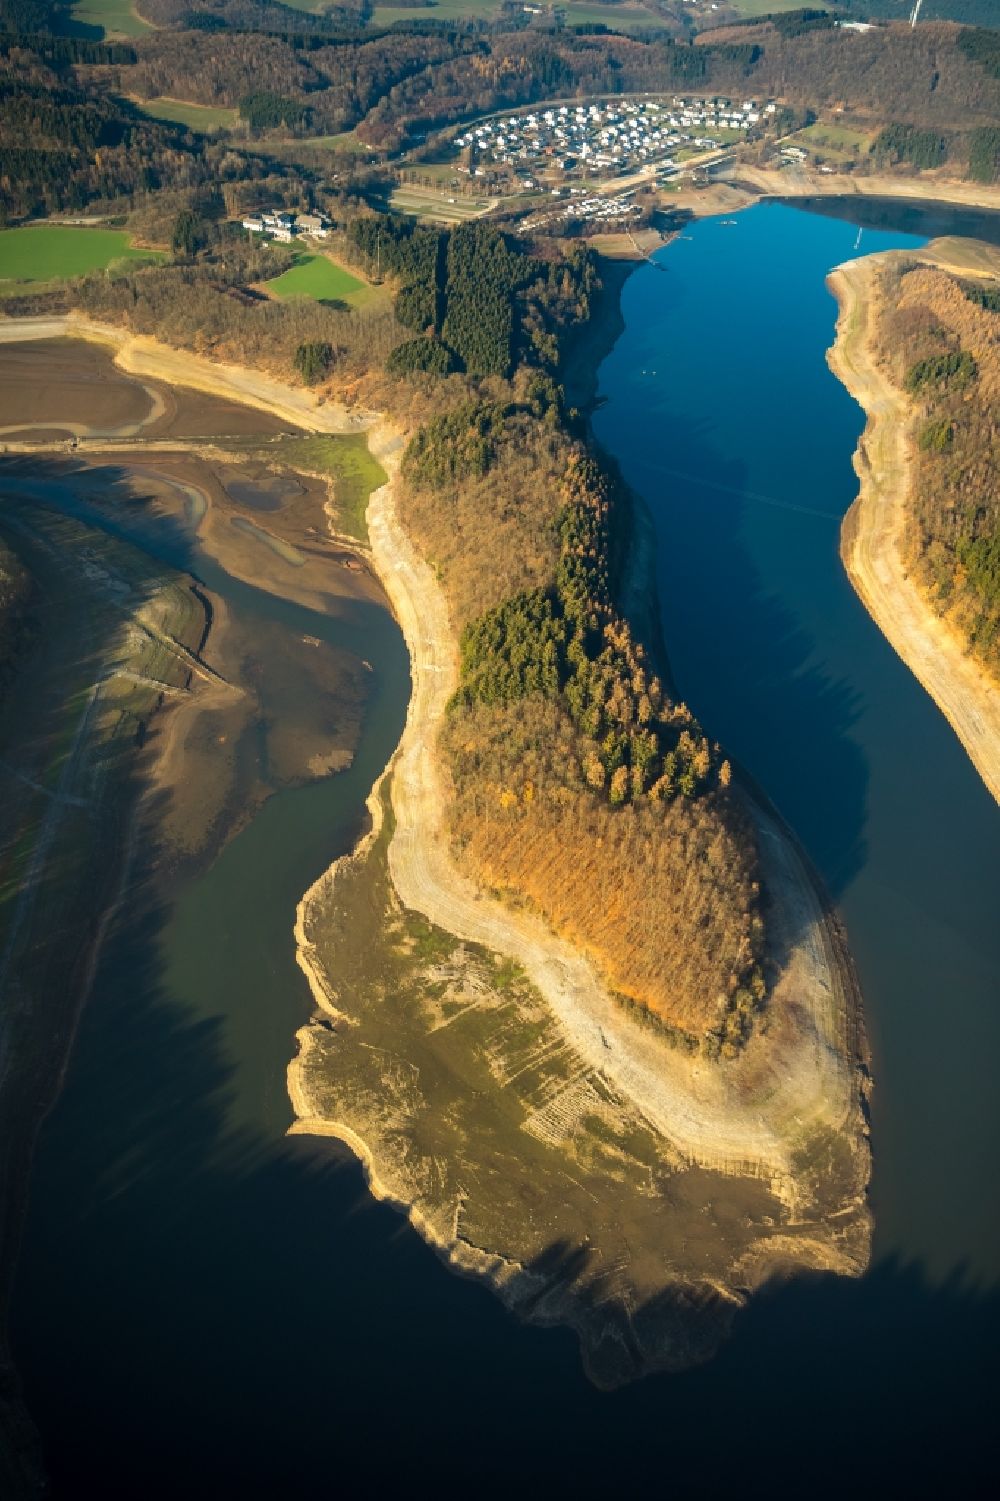 Olpe from above - Low water level and lack of water caused the shoreline areas to be exposed of Biggesee in Olpe in the state North Rhine-Westphalia, Germany